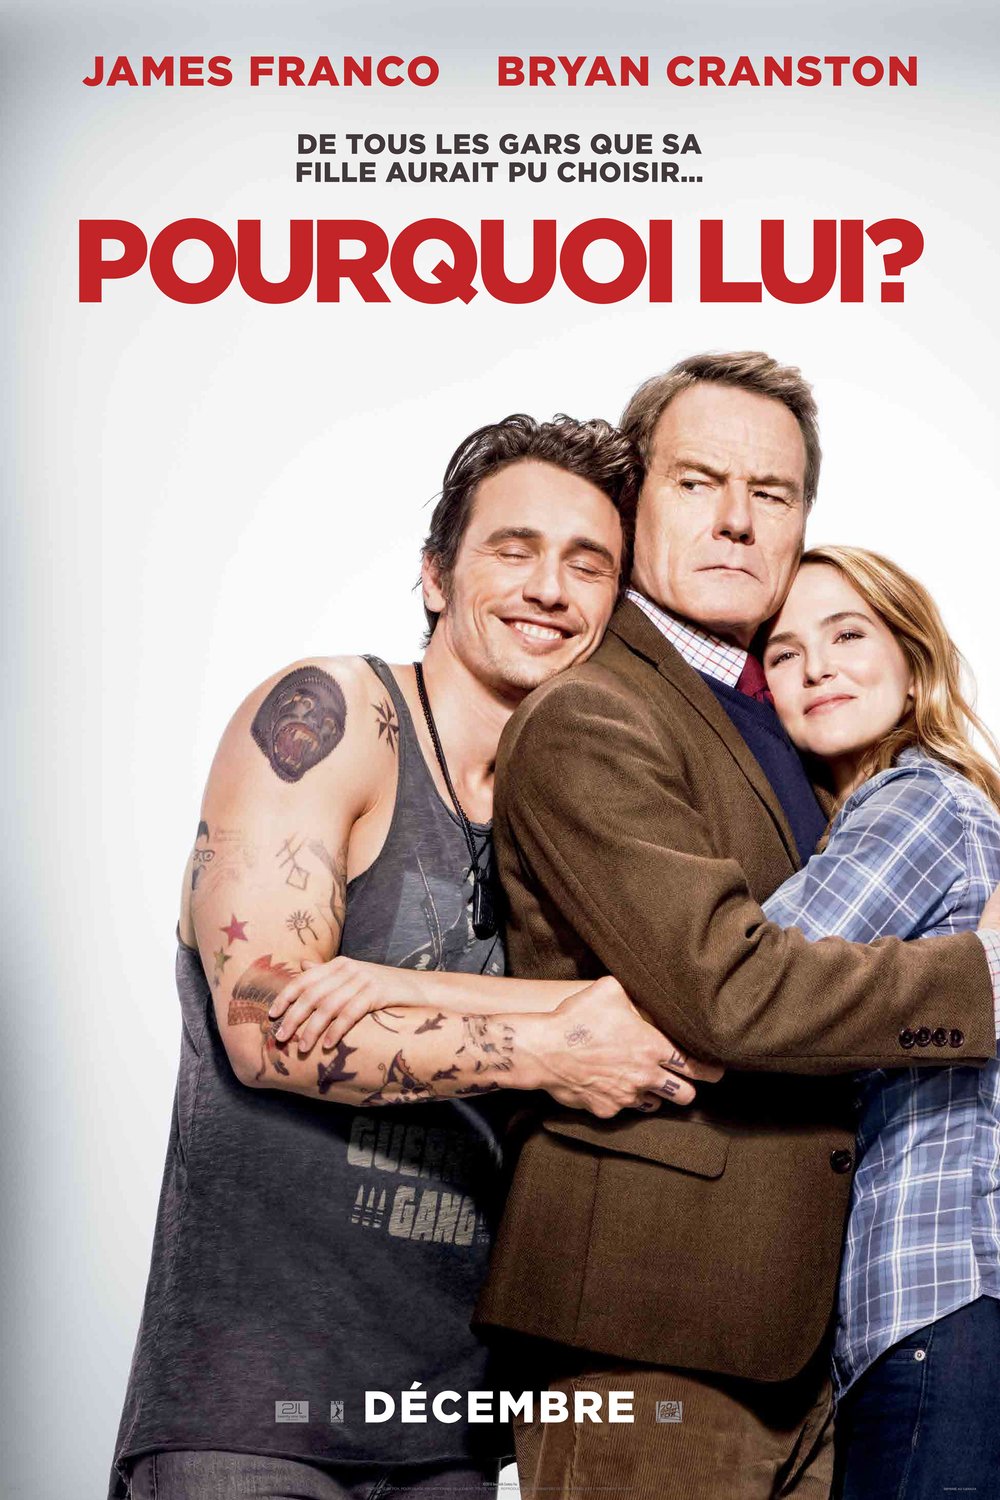 Poster of the movie Pourquoi lui?